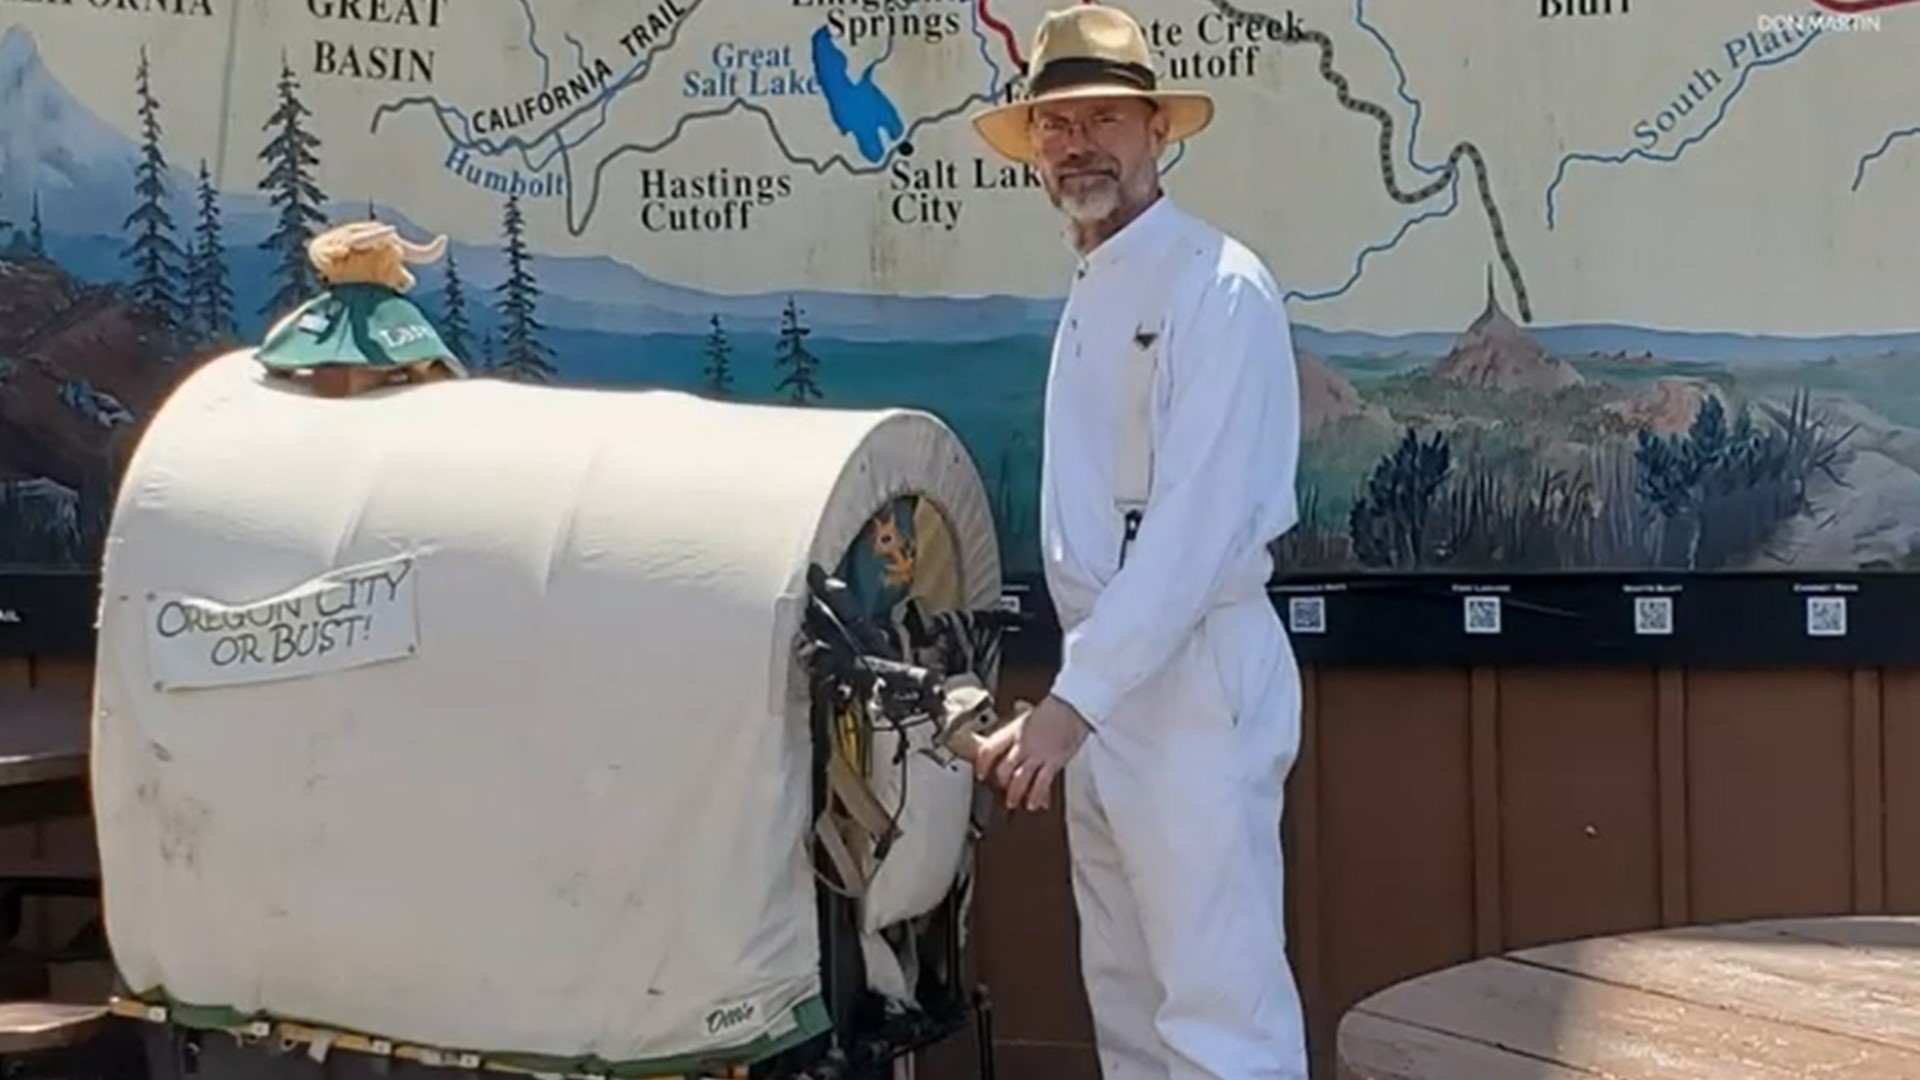 Don Martin was prepared for this hike having spent 30 years in the Navy and had made other 2,000-mile treks in the past.